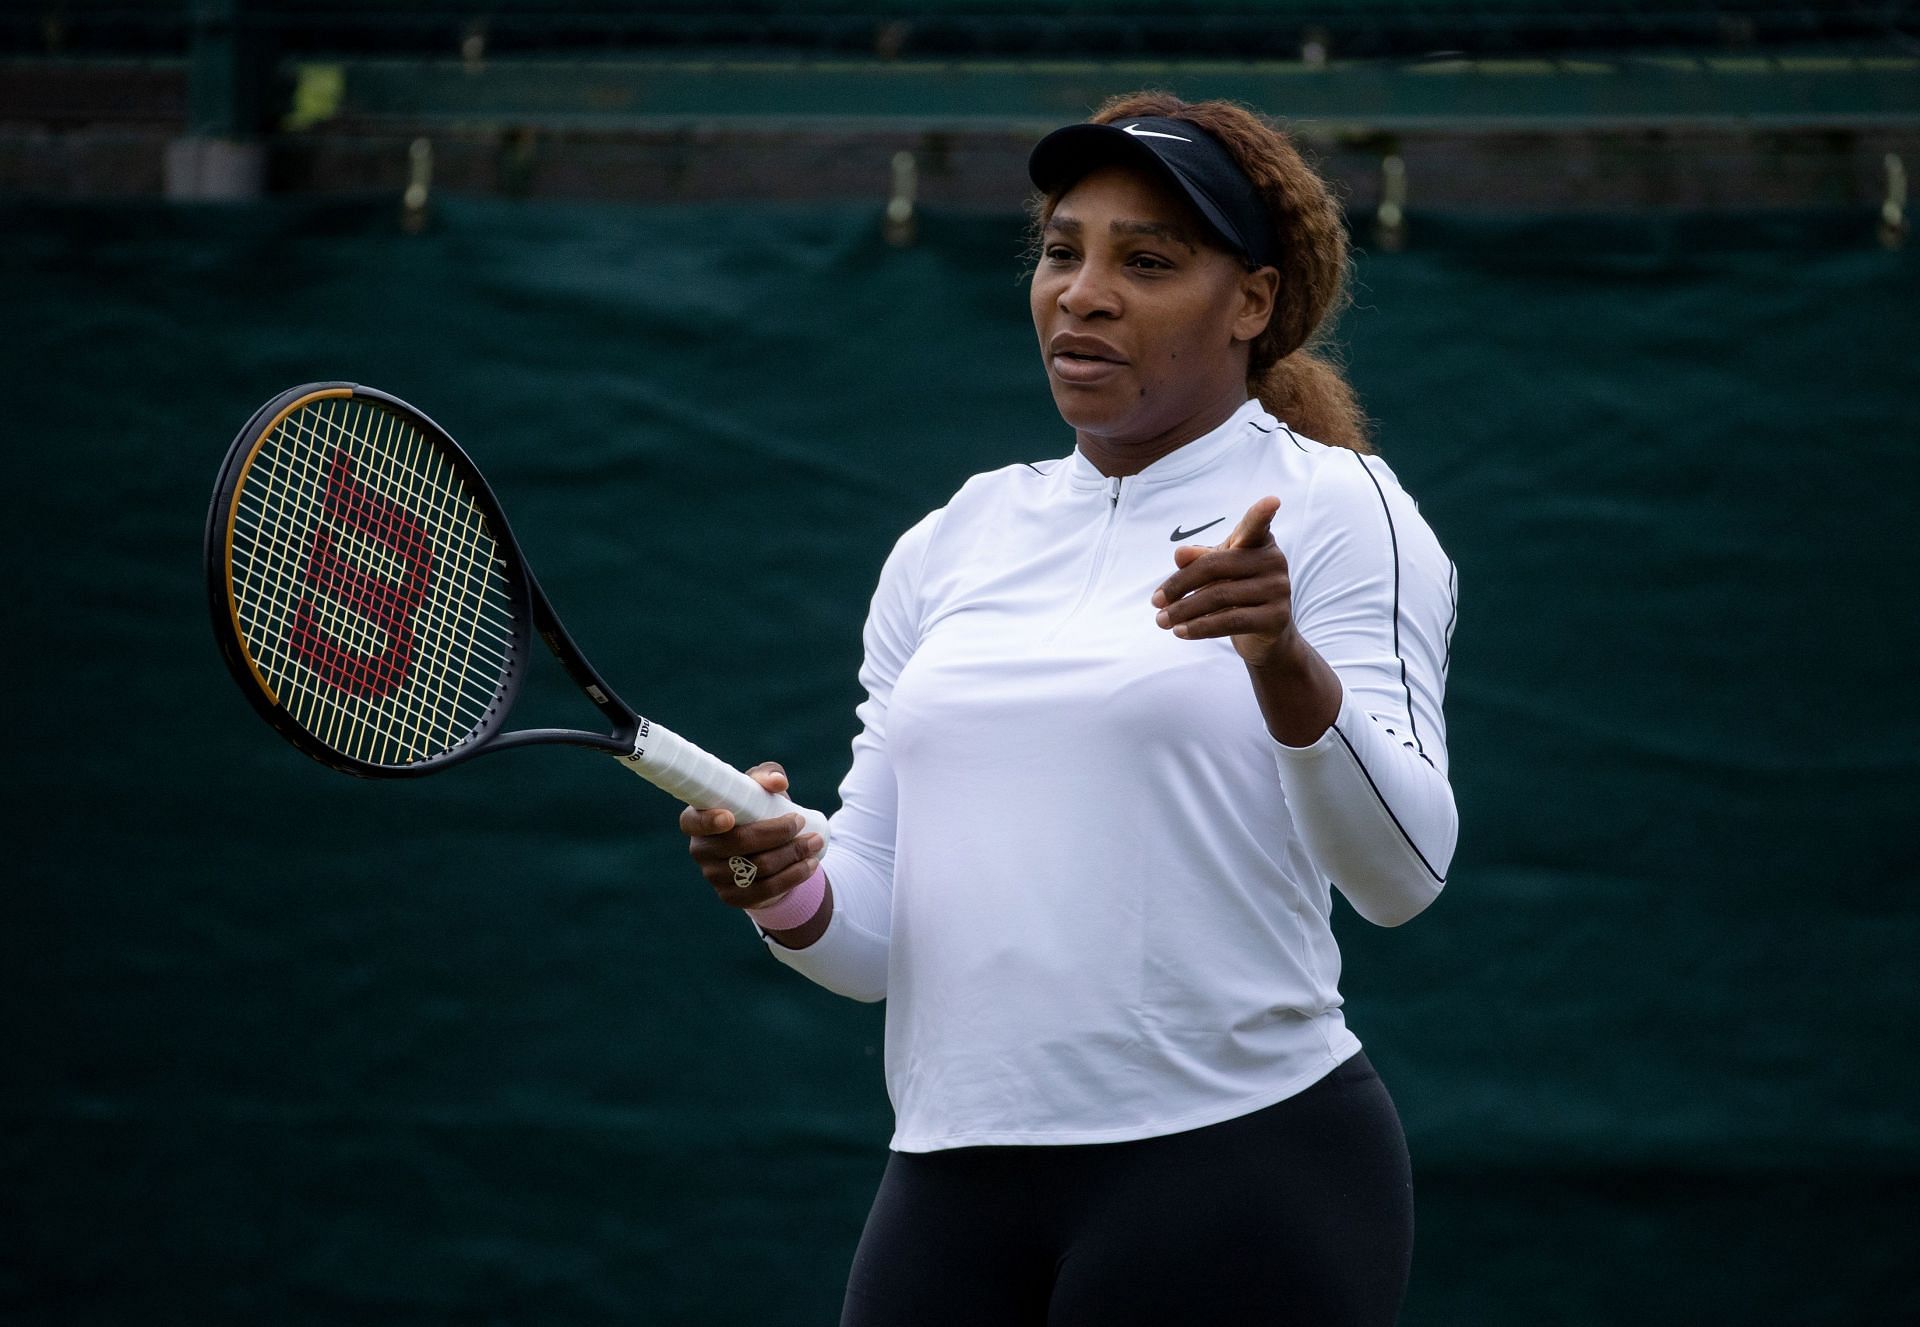 Williams will play at the Rothesay International tournament in Eastbourne